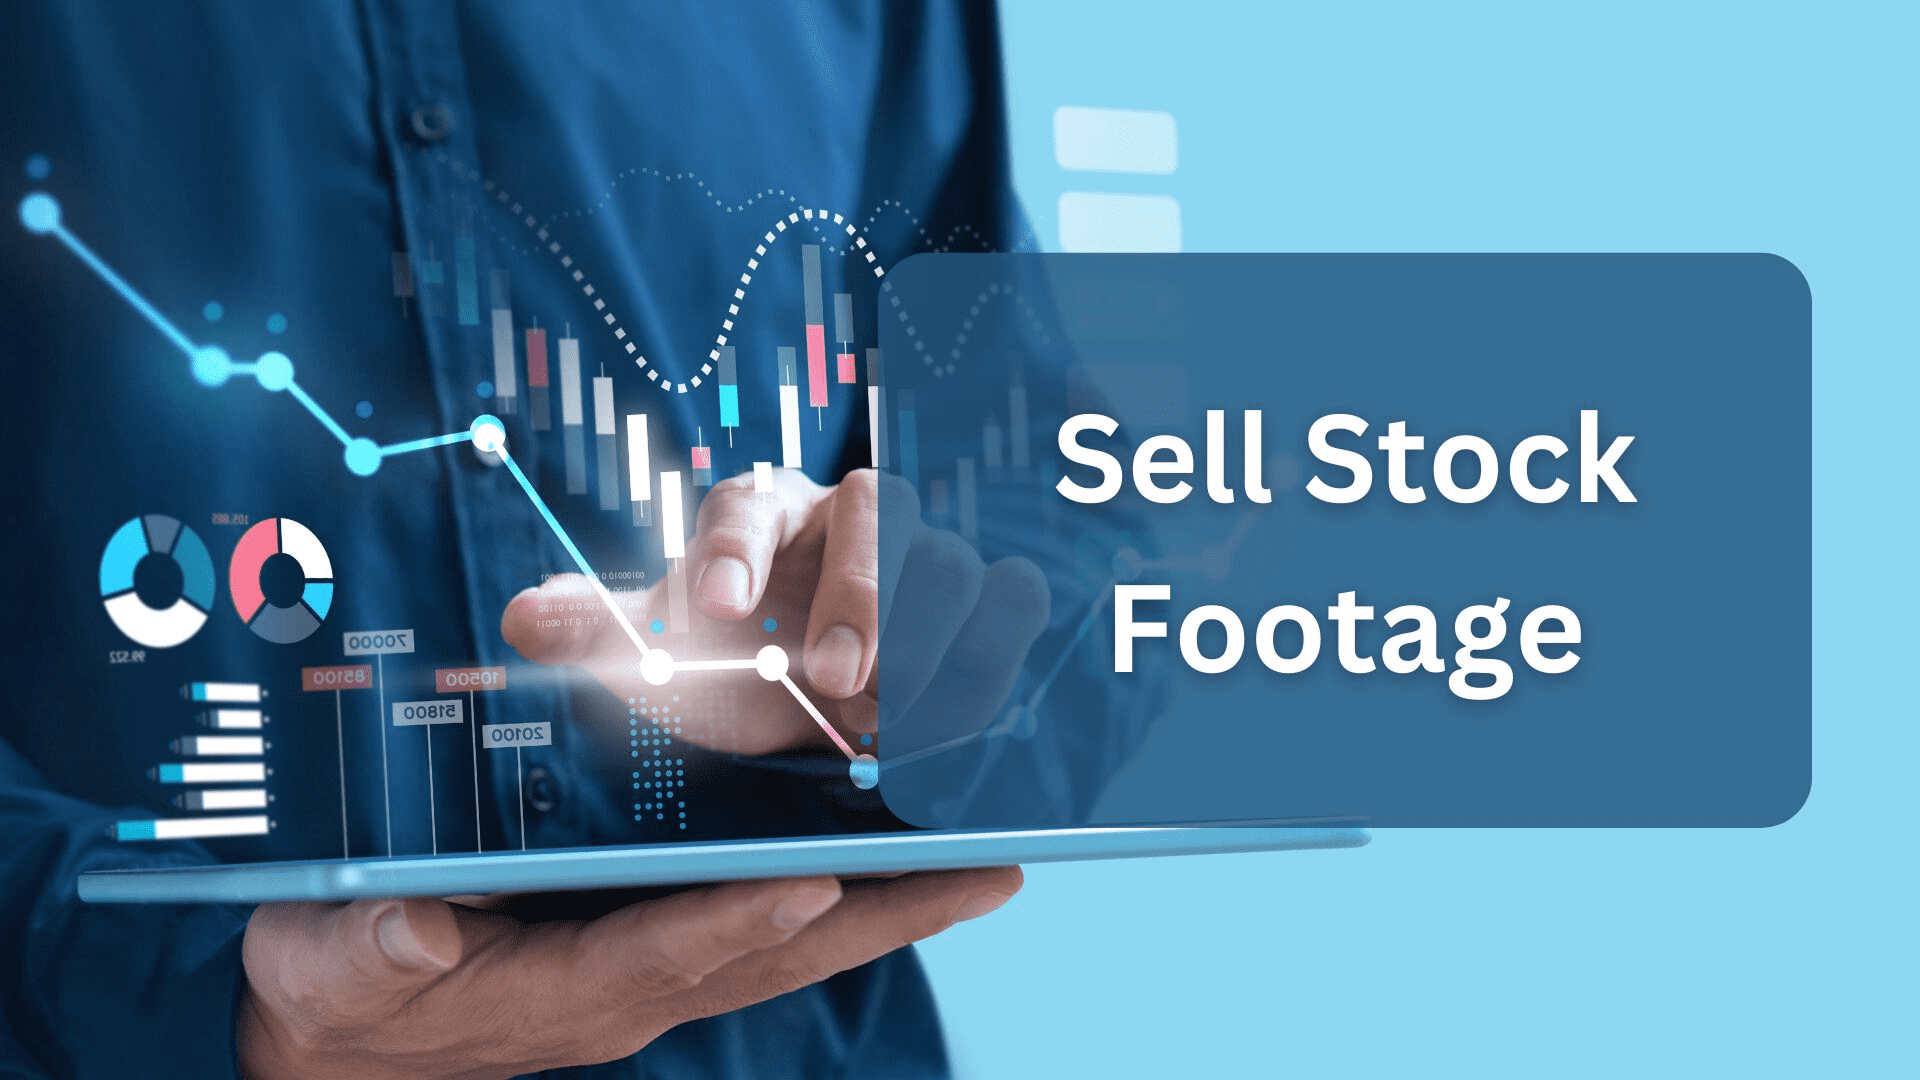 Sell Stock Footage